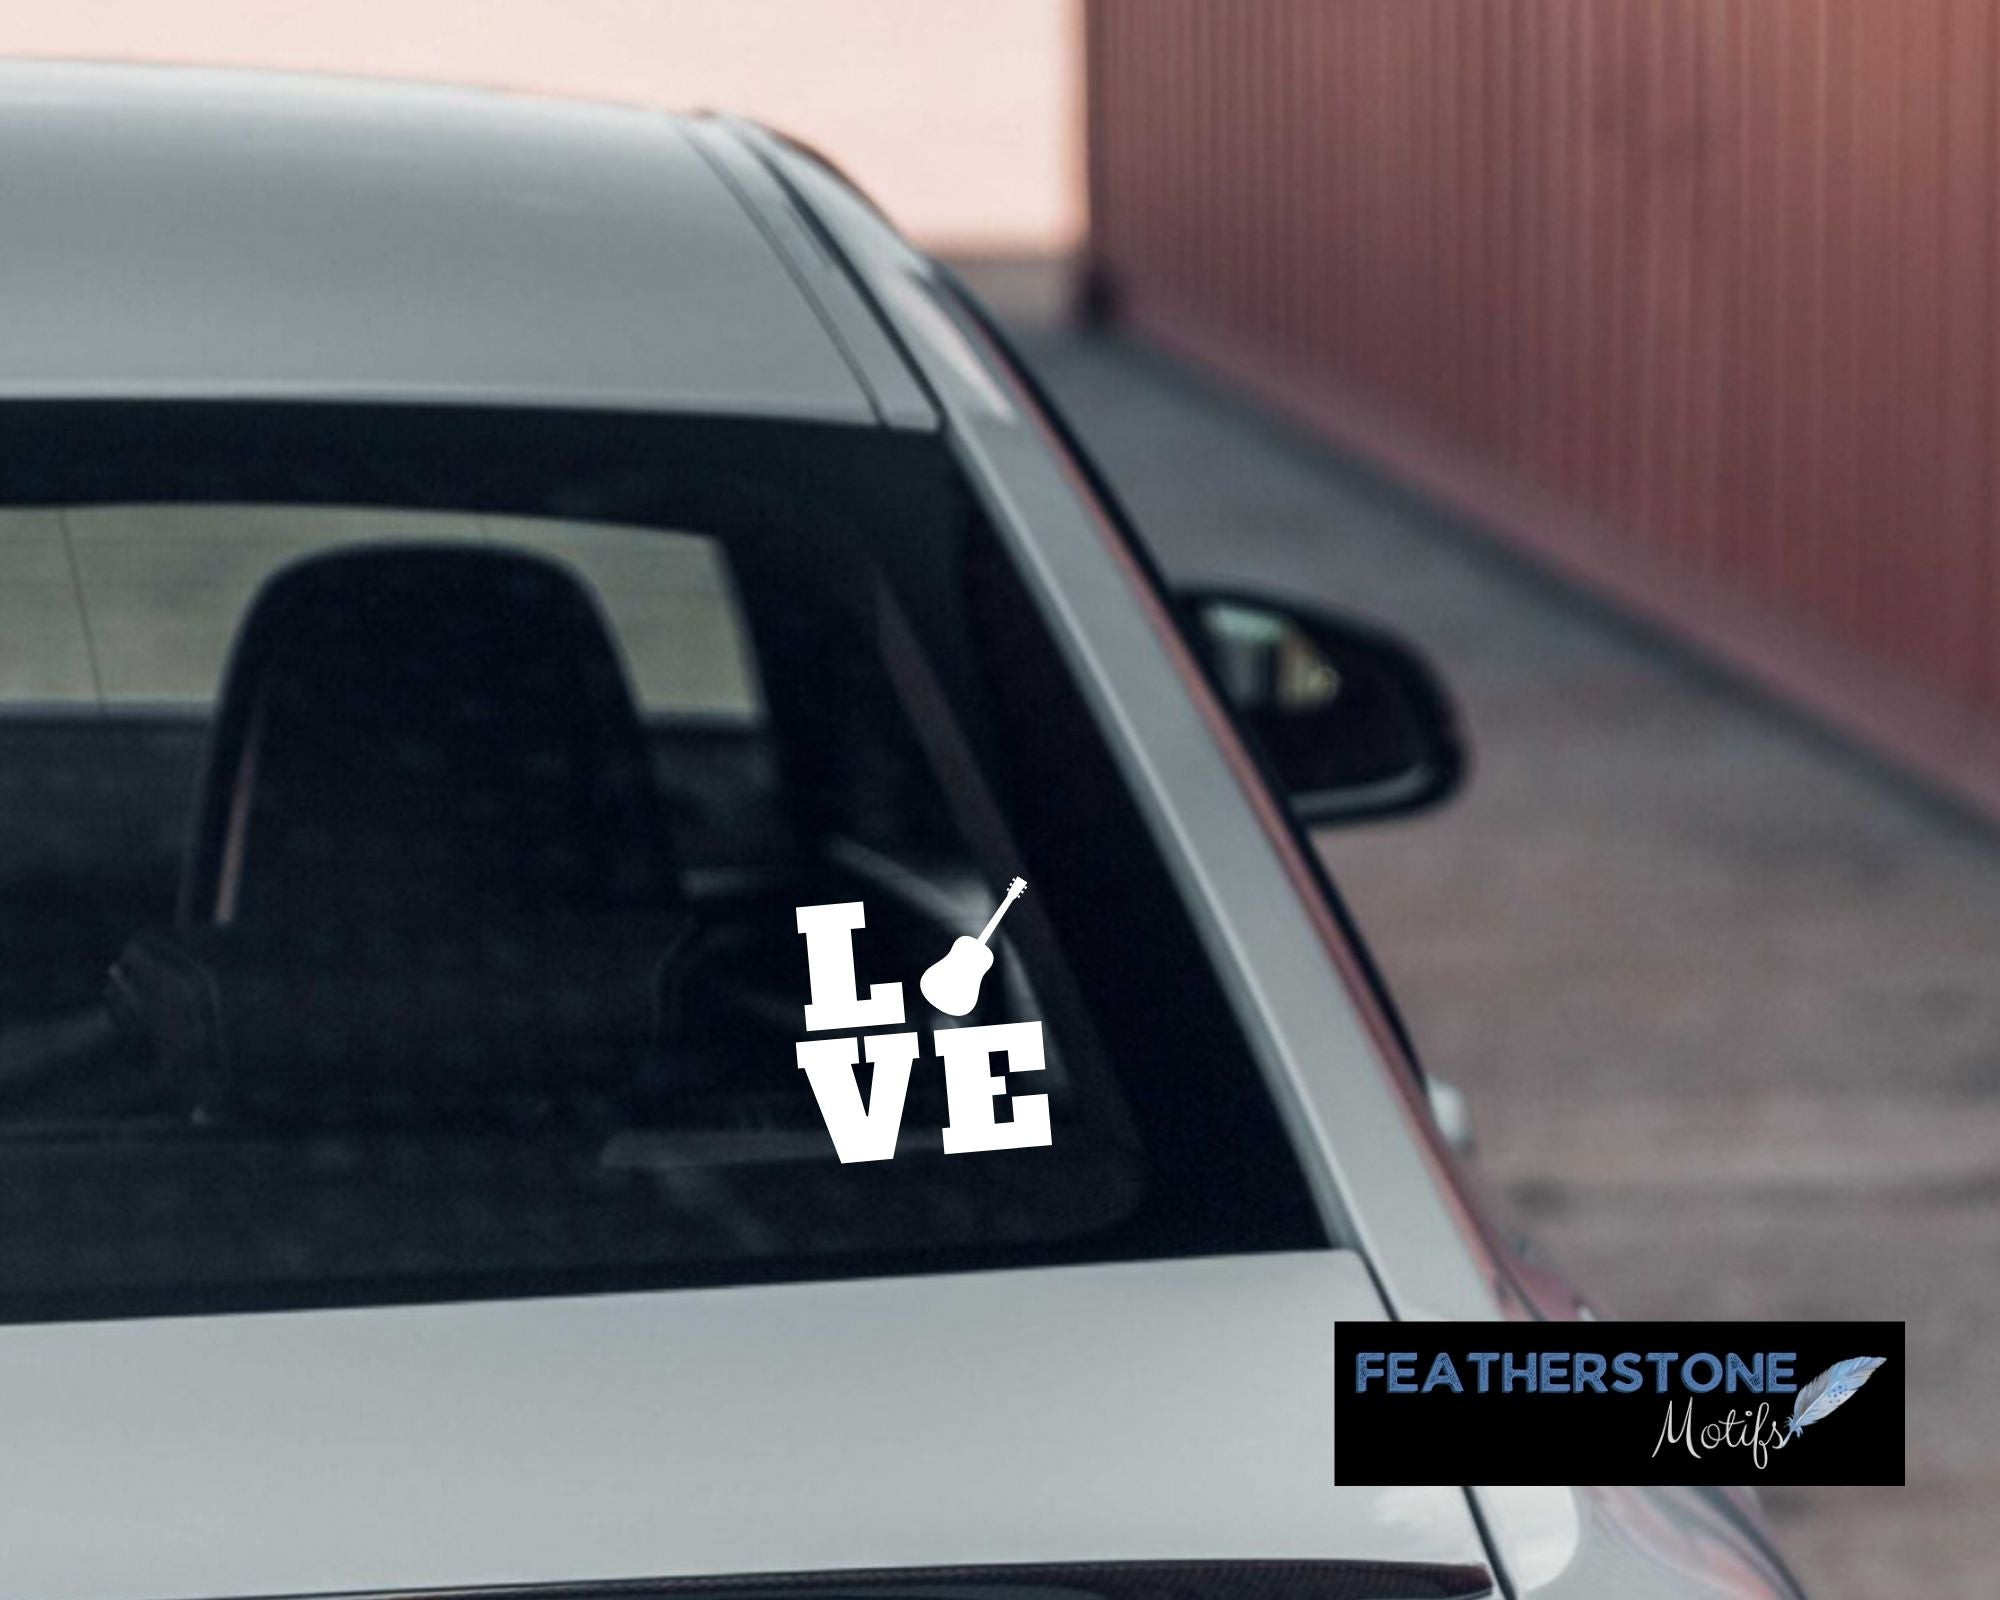 Love the guitar? Then show it with this acoustic guitar love square! Available in 4 sizes and 10 colors, these vinyl decals make great gifts for everyone. This image shows the acoustic guitar love square on the back window of a car.